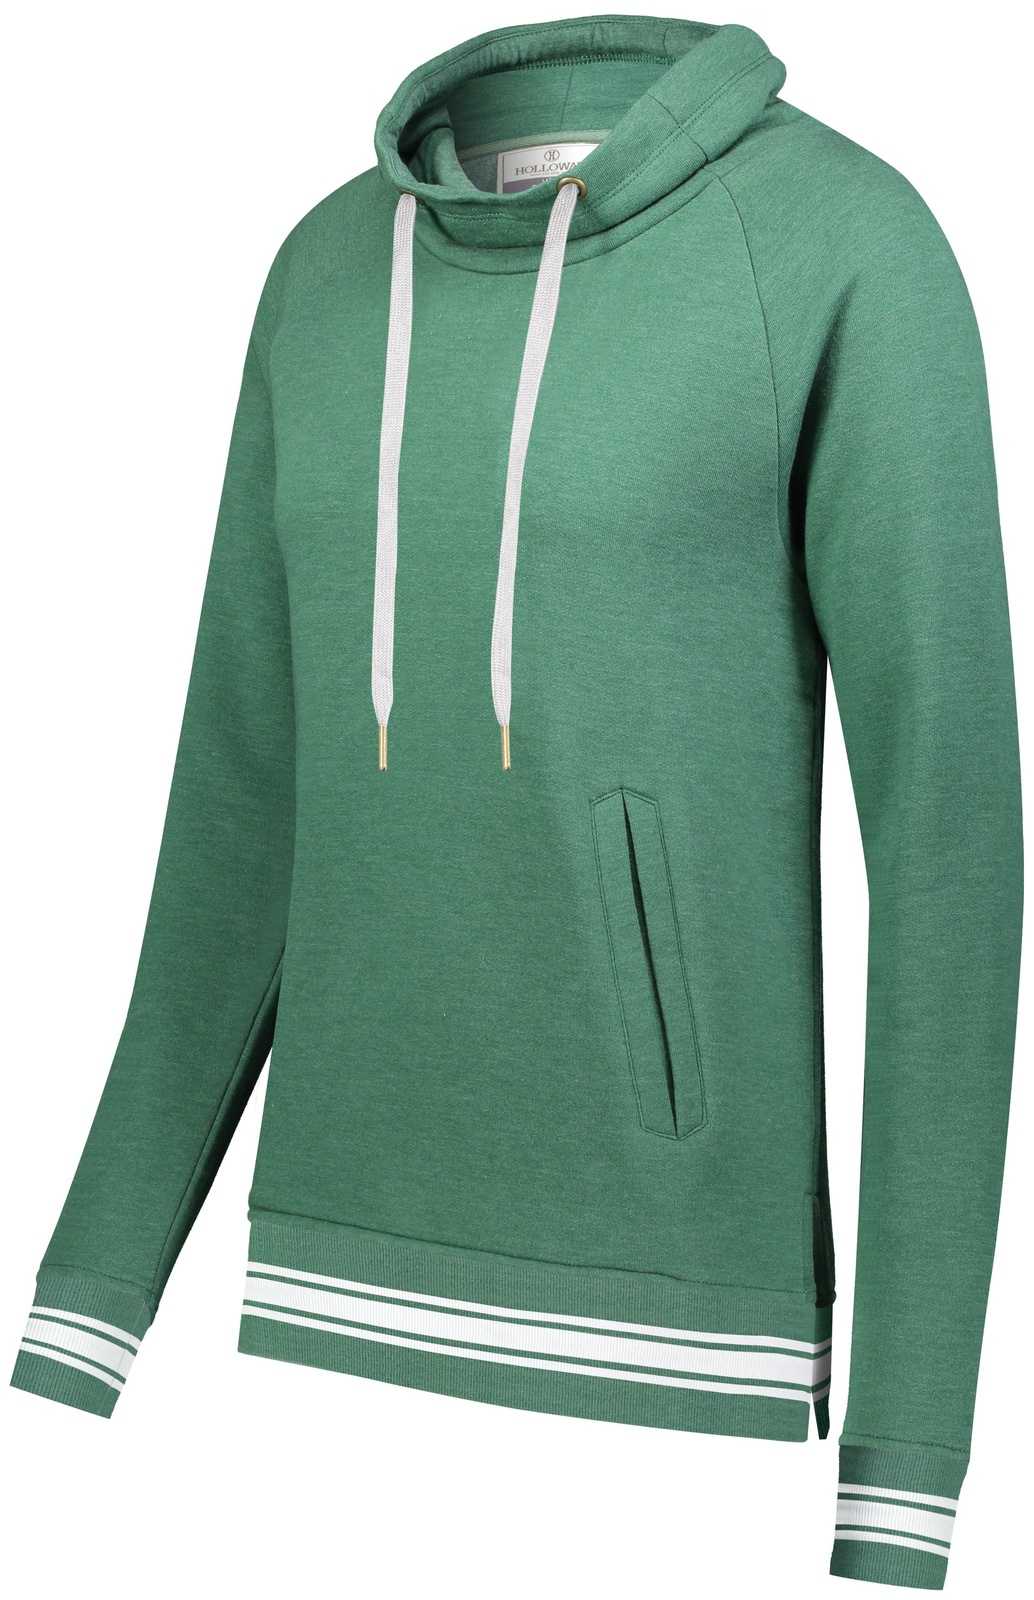 Holloway 229763 Ladies Ivy League Funnel Neck Pullover - Dark Green Heather White - HIT a Double